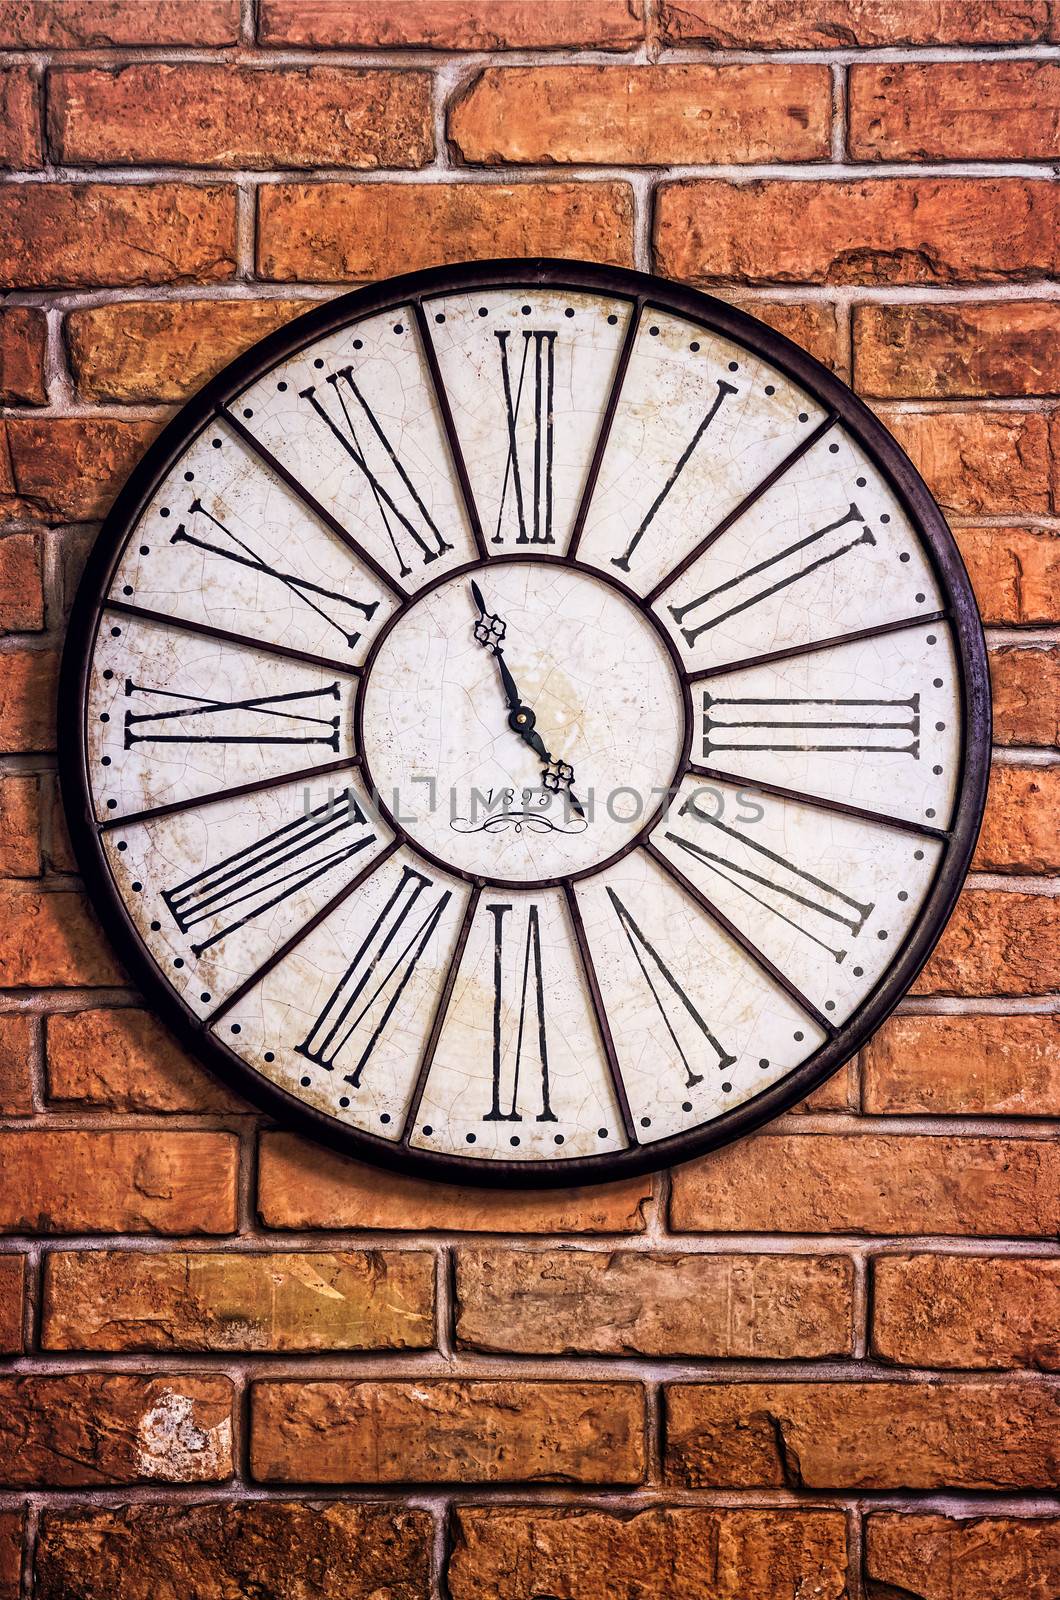 Old vintage clock on textured brick wall by martinm303